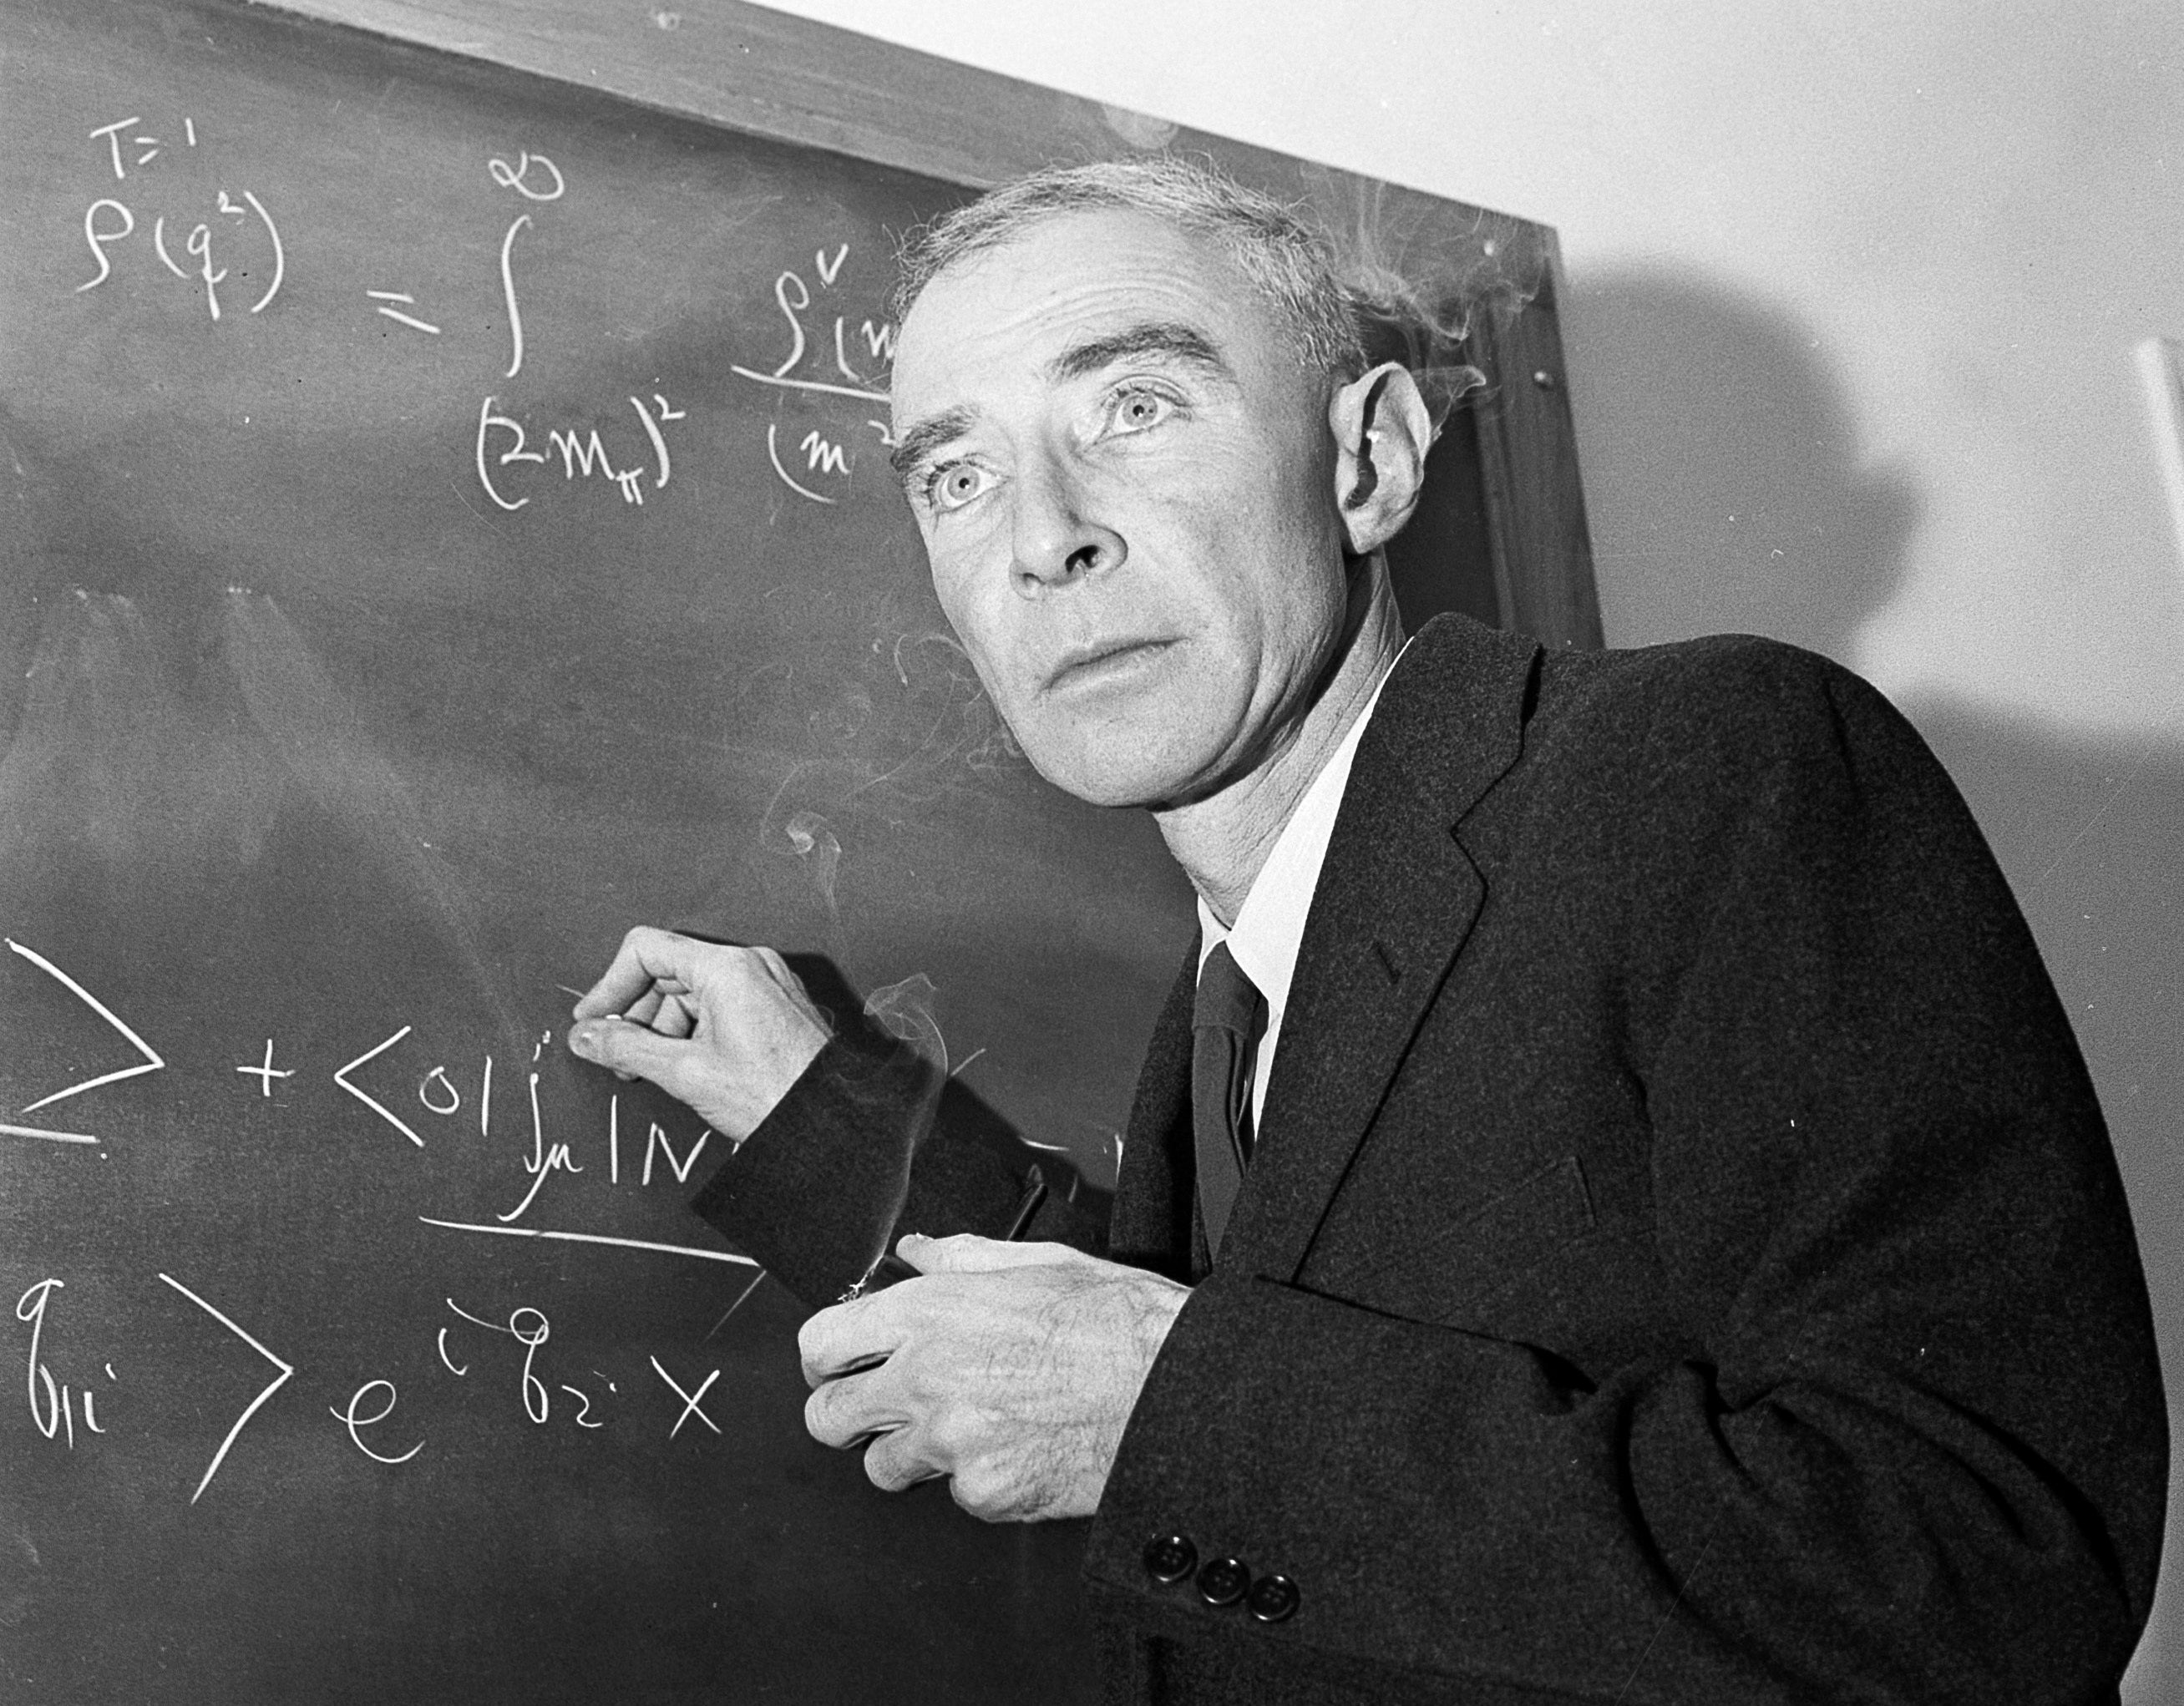 Physicist J Robert Oppenheimer was one of many scientists and administrators responsible for the development of the atomic bomb